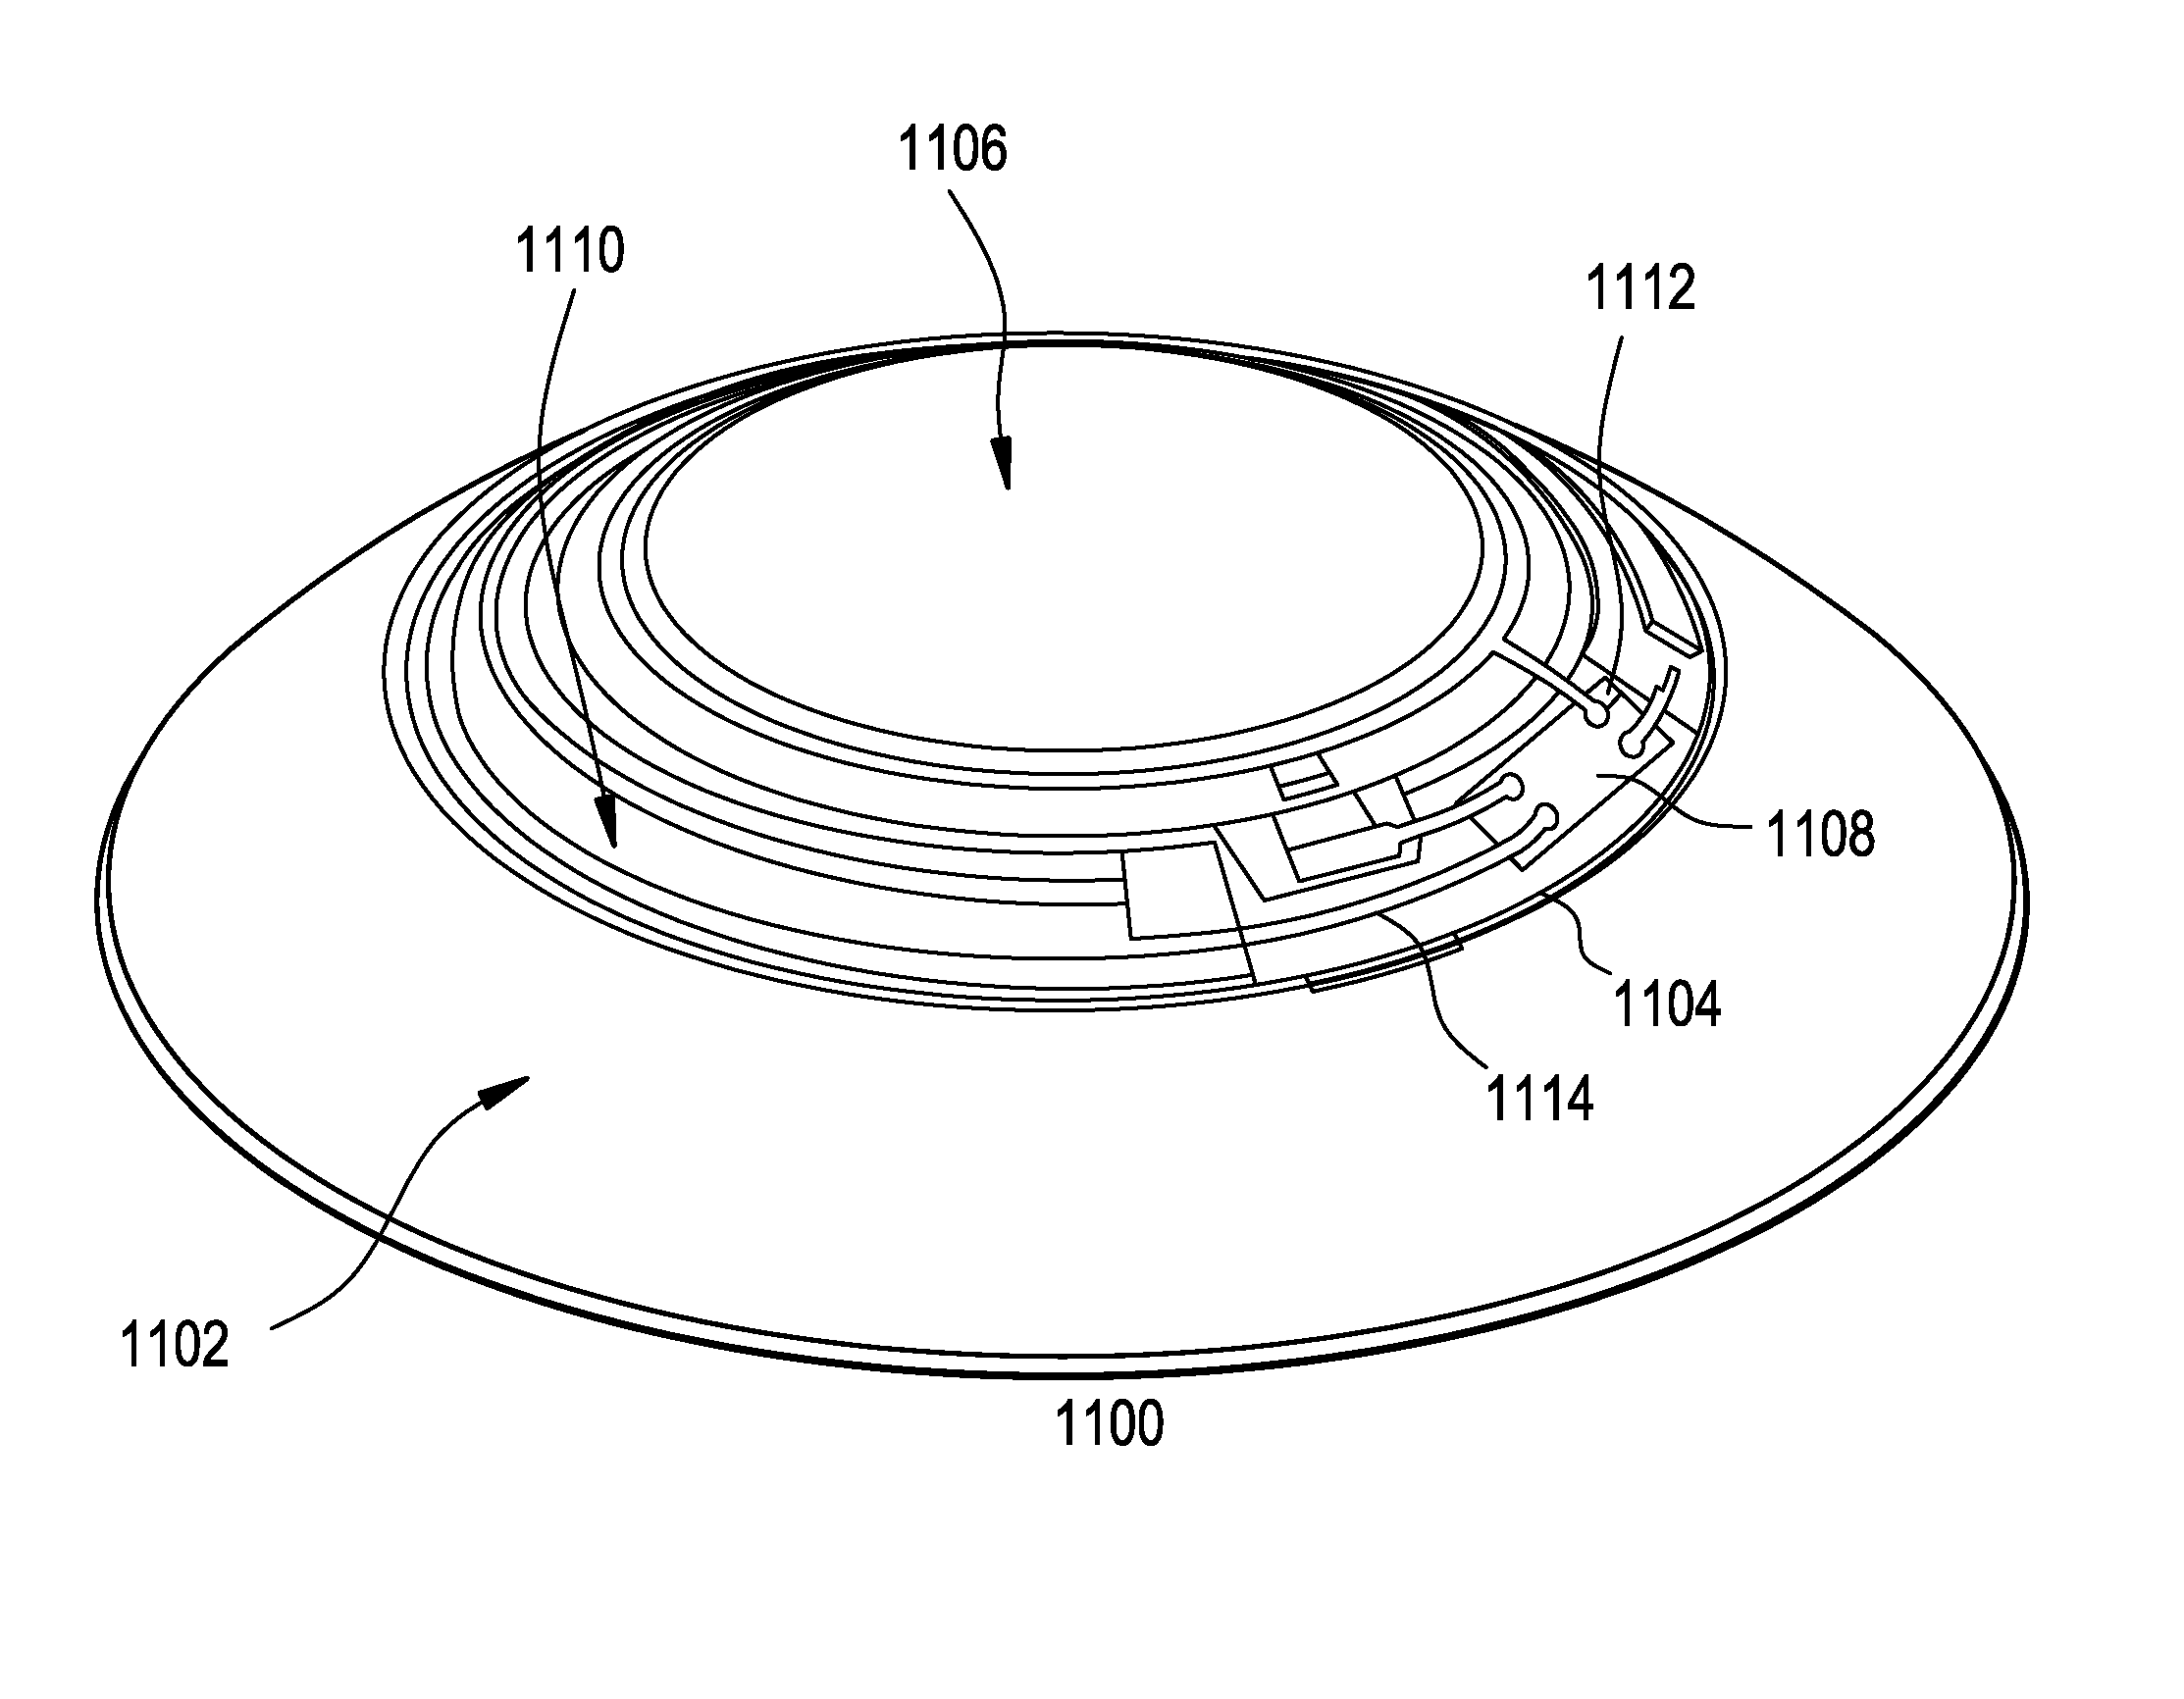 Electronic ophthalmic lens with lid position sensor